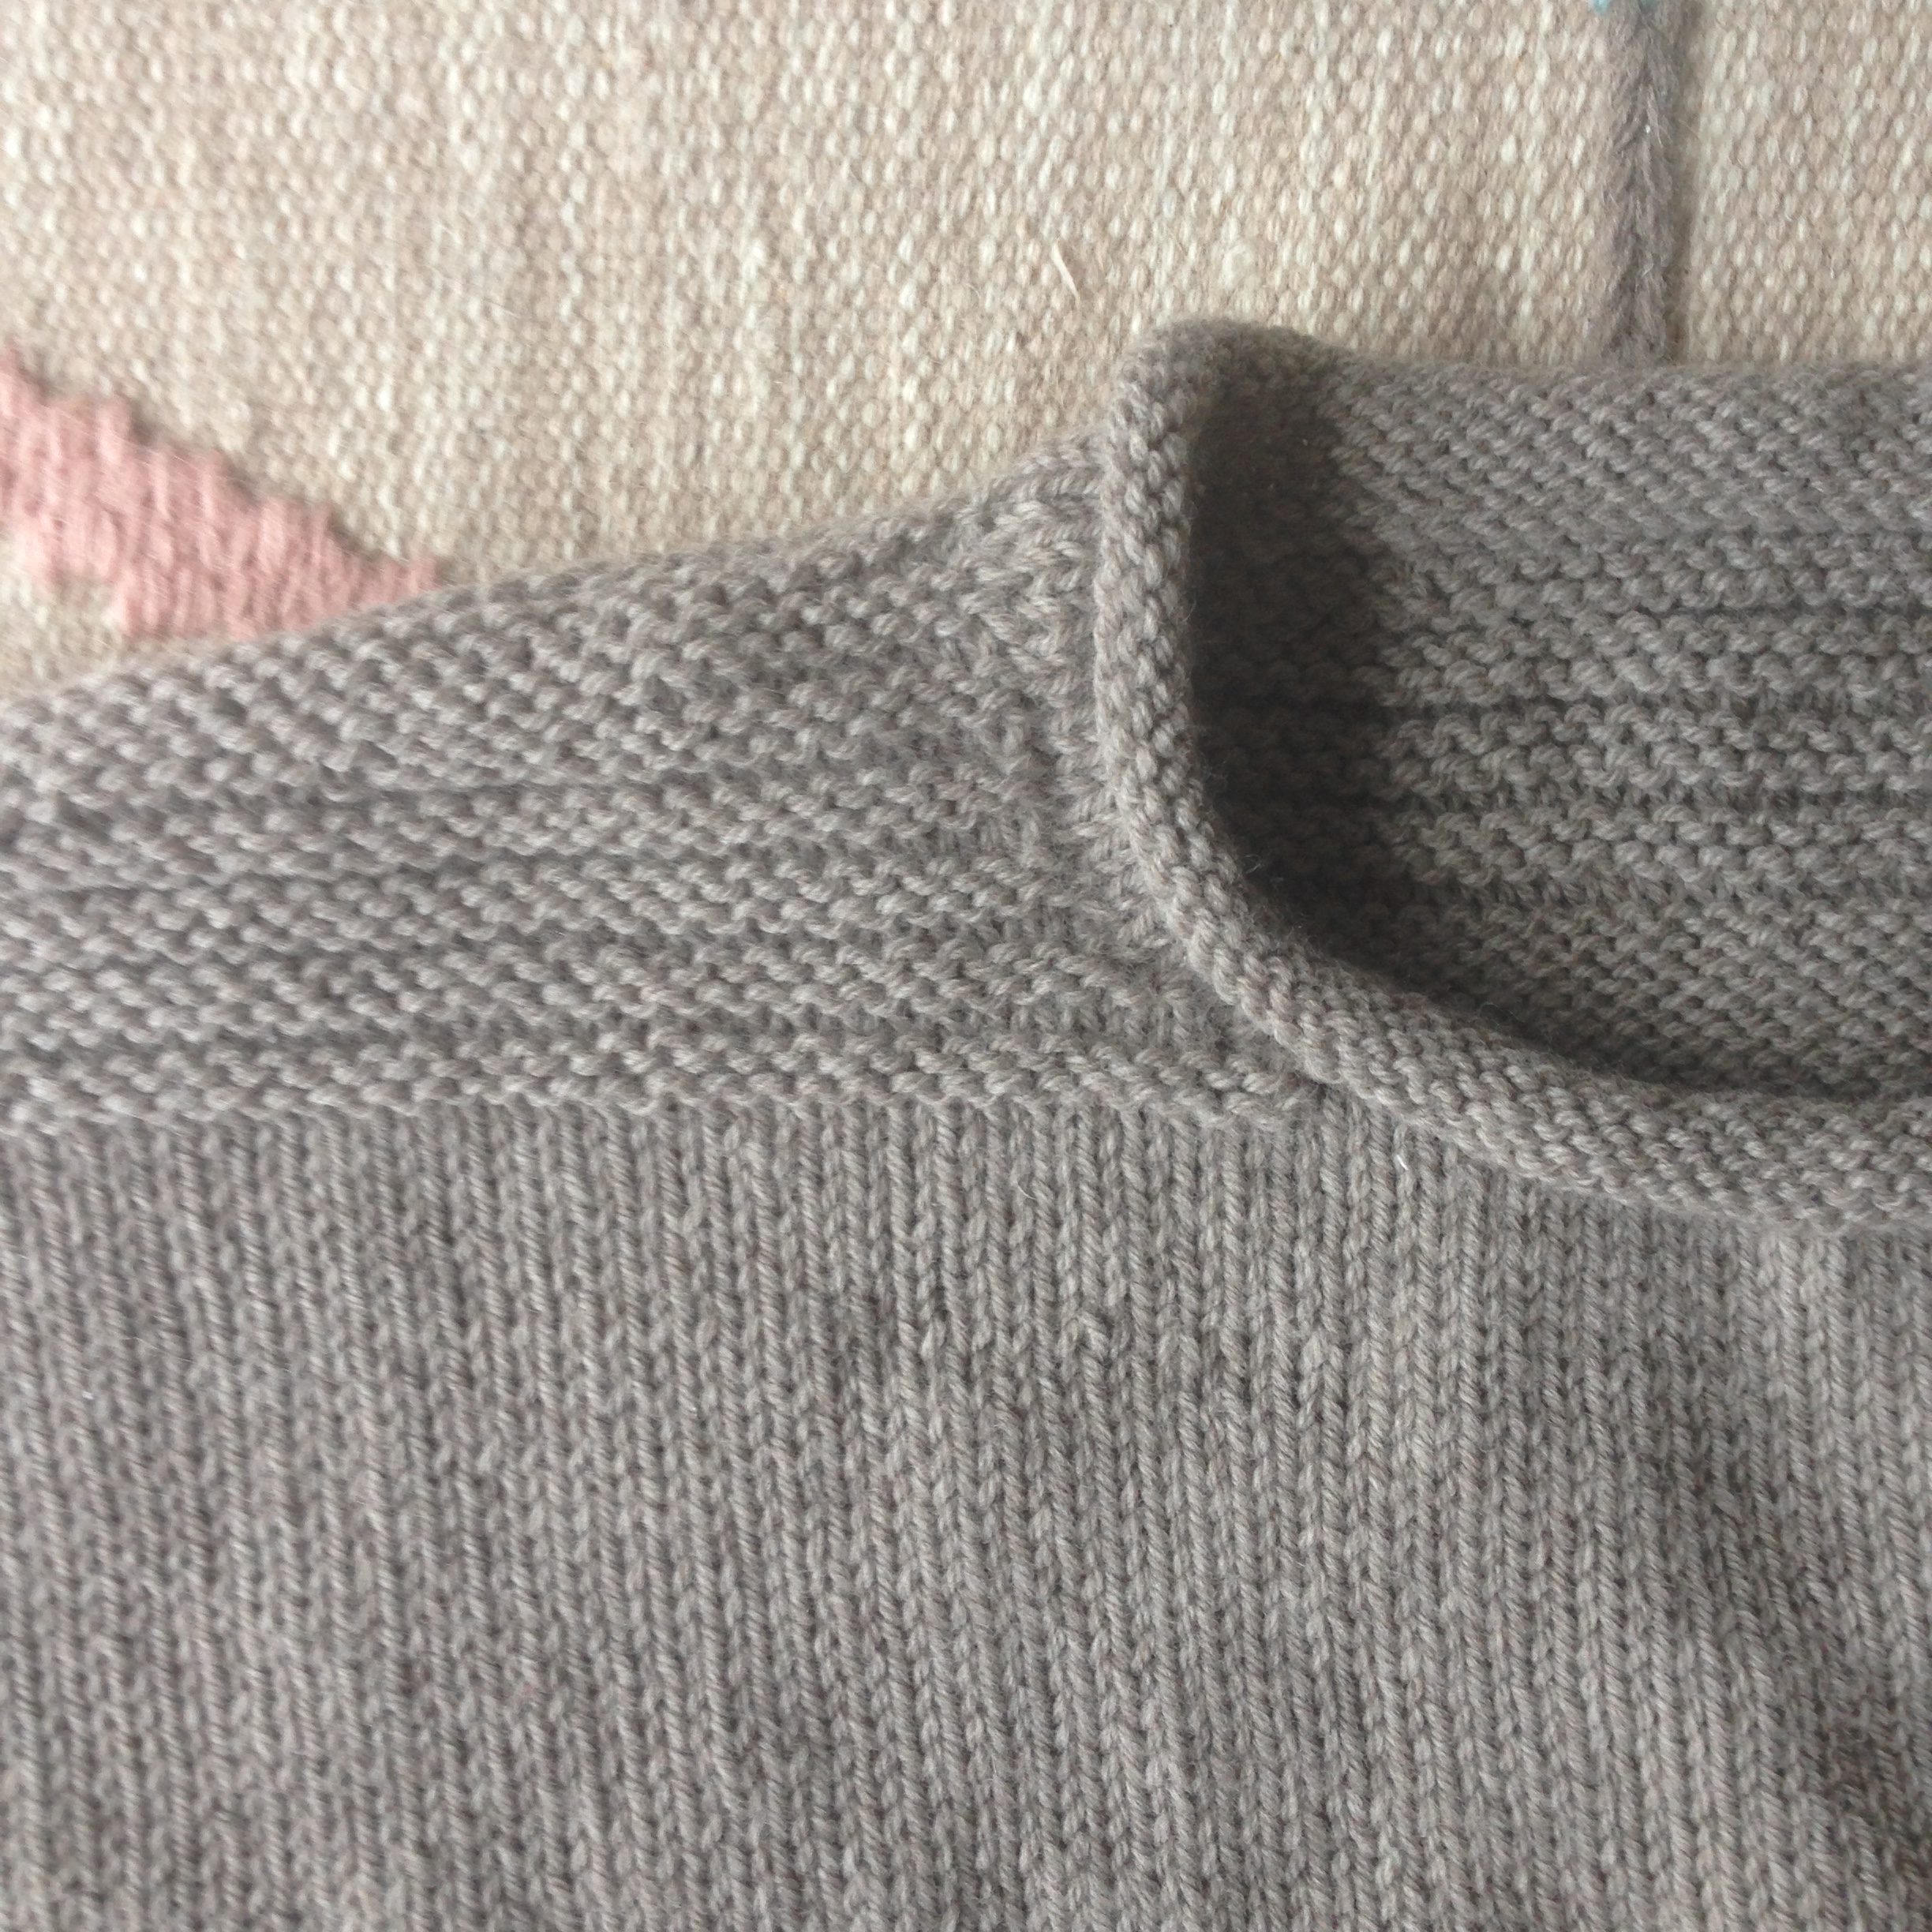 I Finished my Jumper (Worsted Boxy by Joji Locatelli) | blog post by Homelea Lass